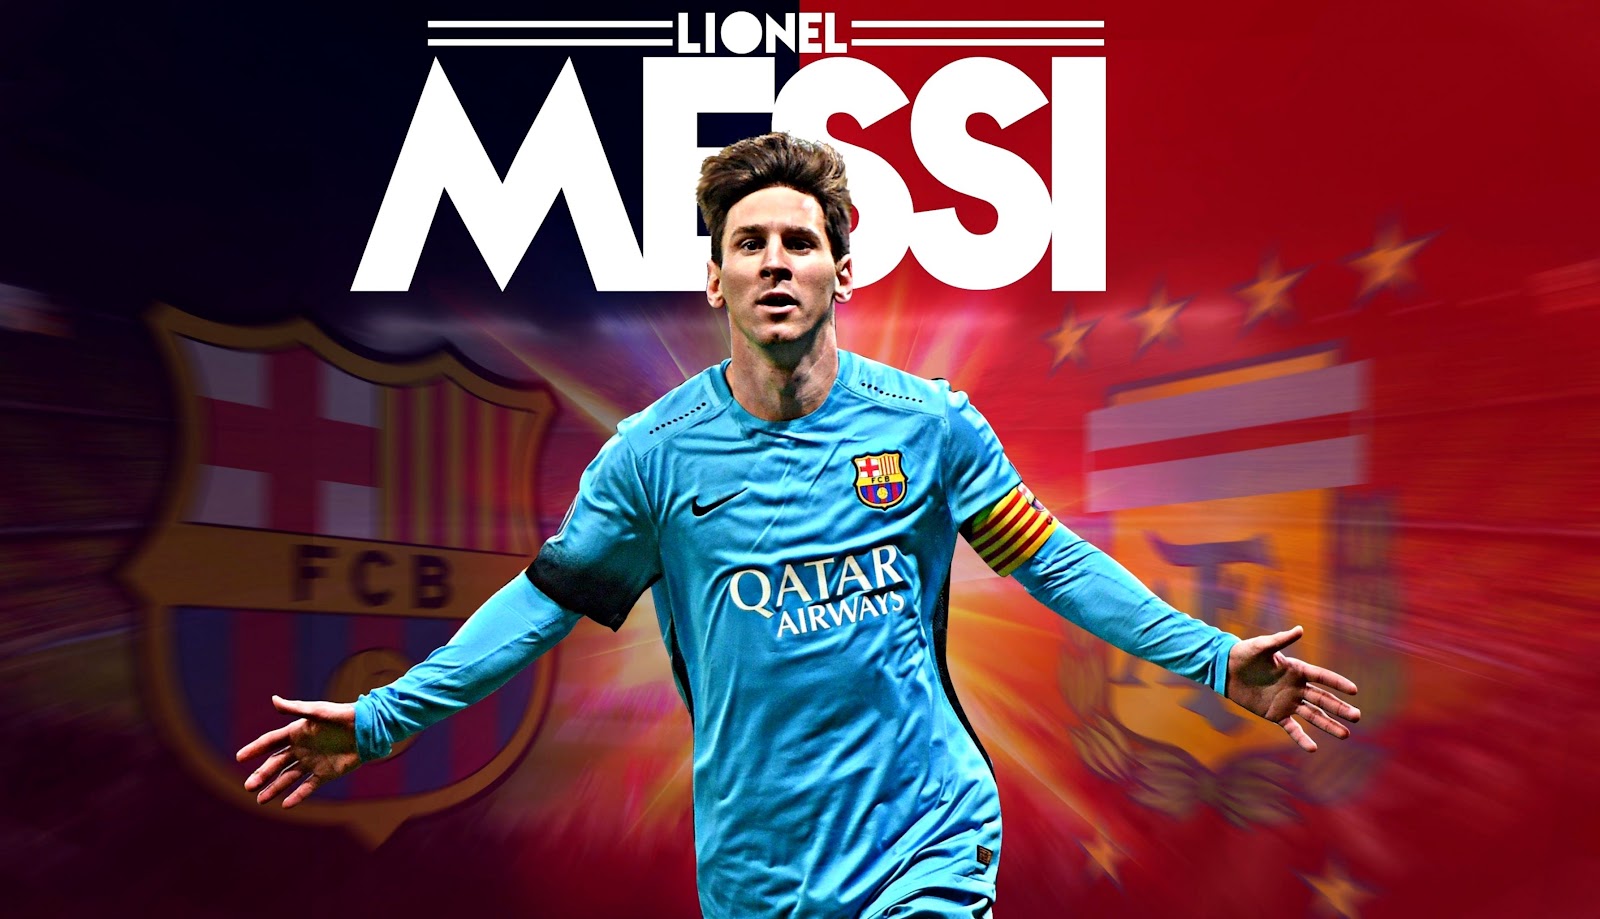 Lionel Messi Wallpaper This Wallpapers